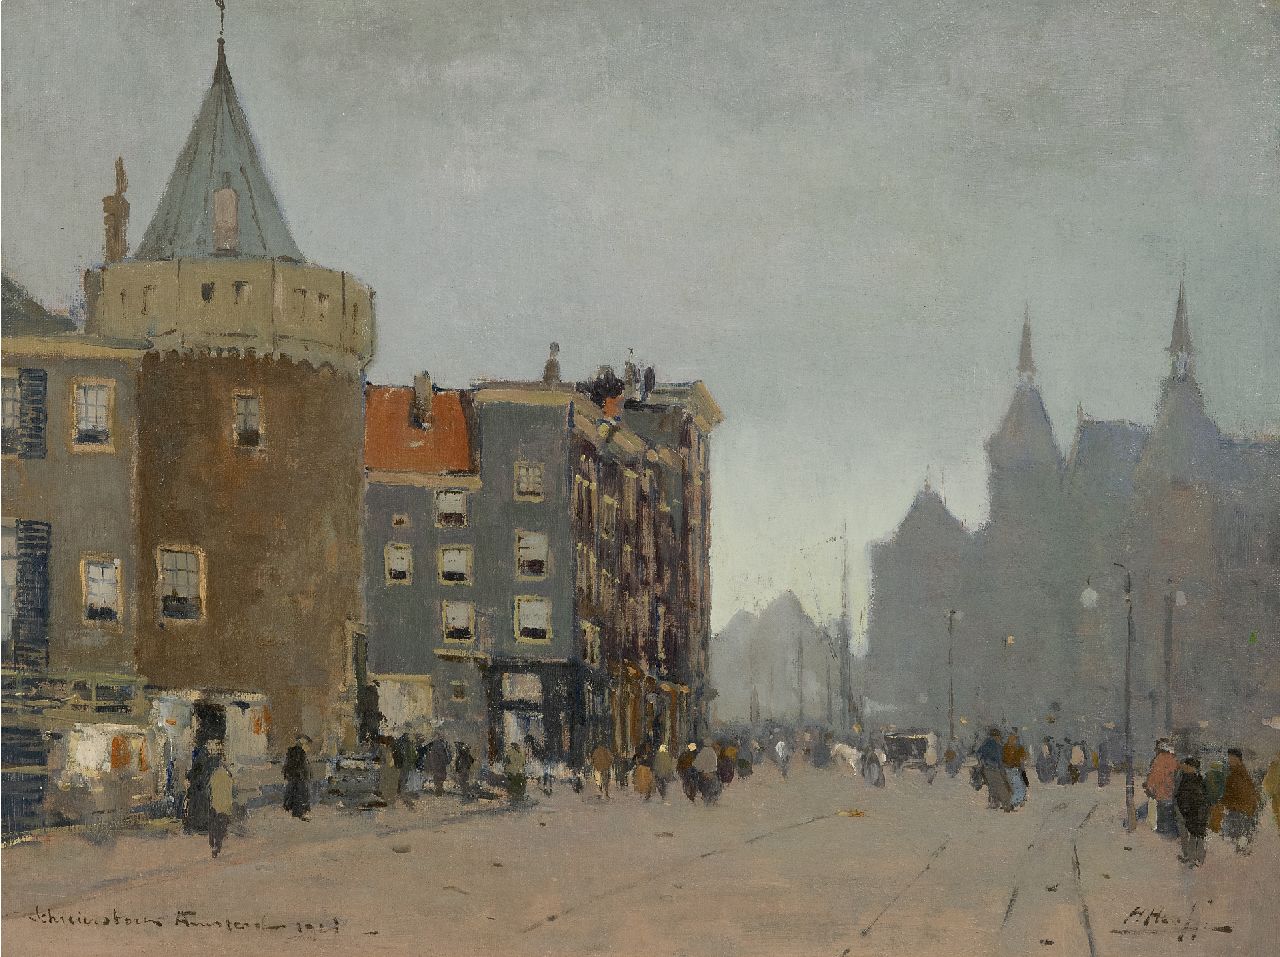 Heuff H.D.  | 'Herman' Davinus Heuff | Paintings offered for sale | The Prins Hendrikkade with the Scheierstoren, Amsterdam, oil on canvas laid down on board 35.1 x 47.1 cm, signed l.r. and dated 1923, without frame